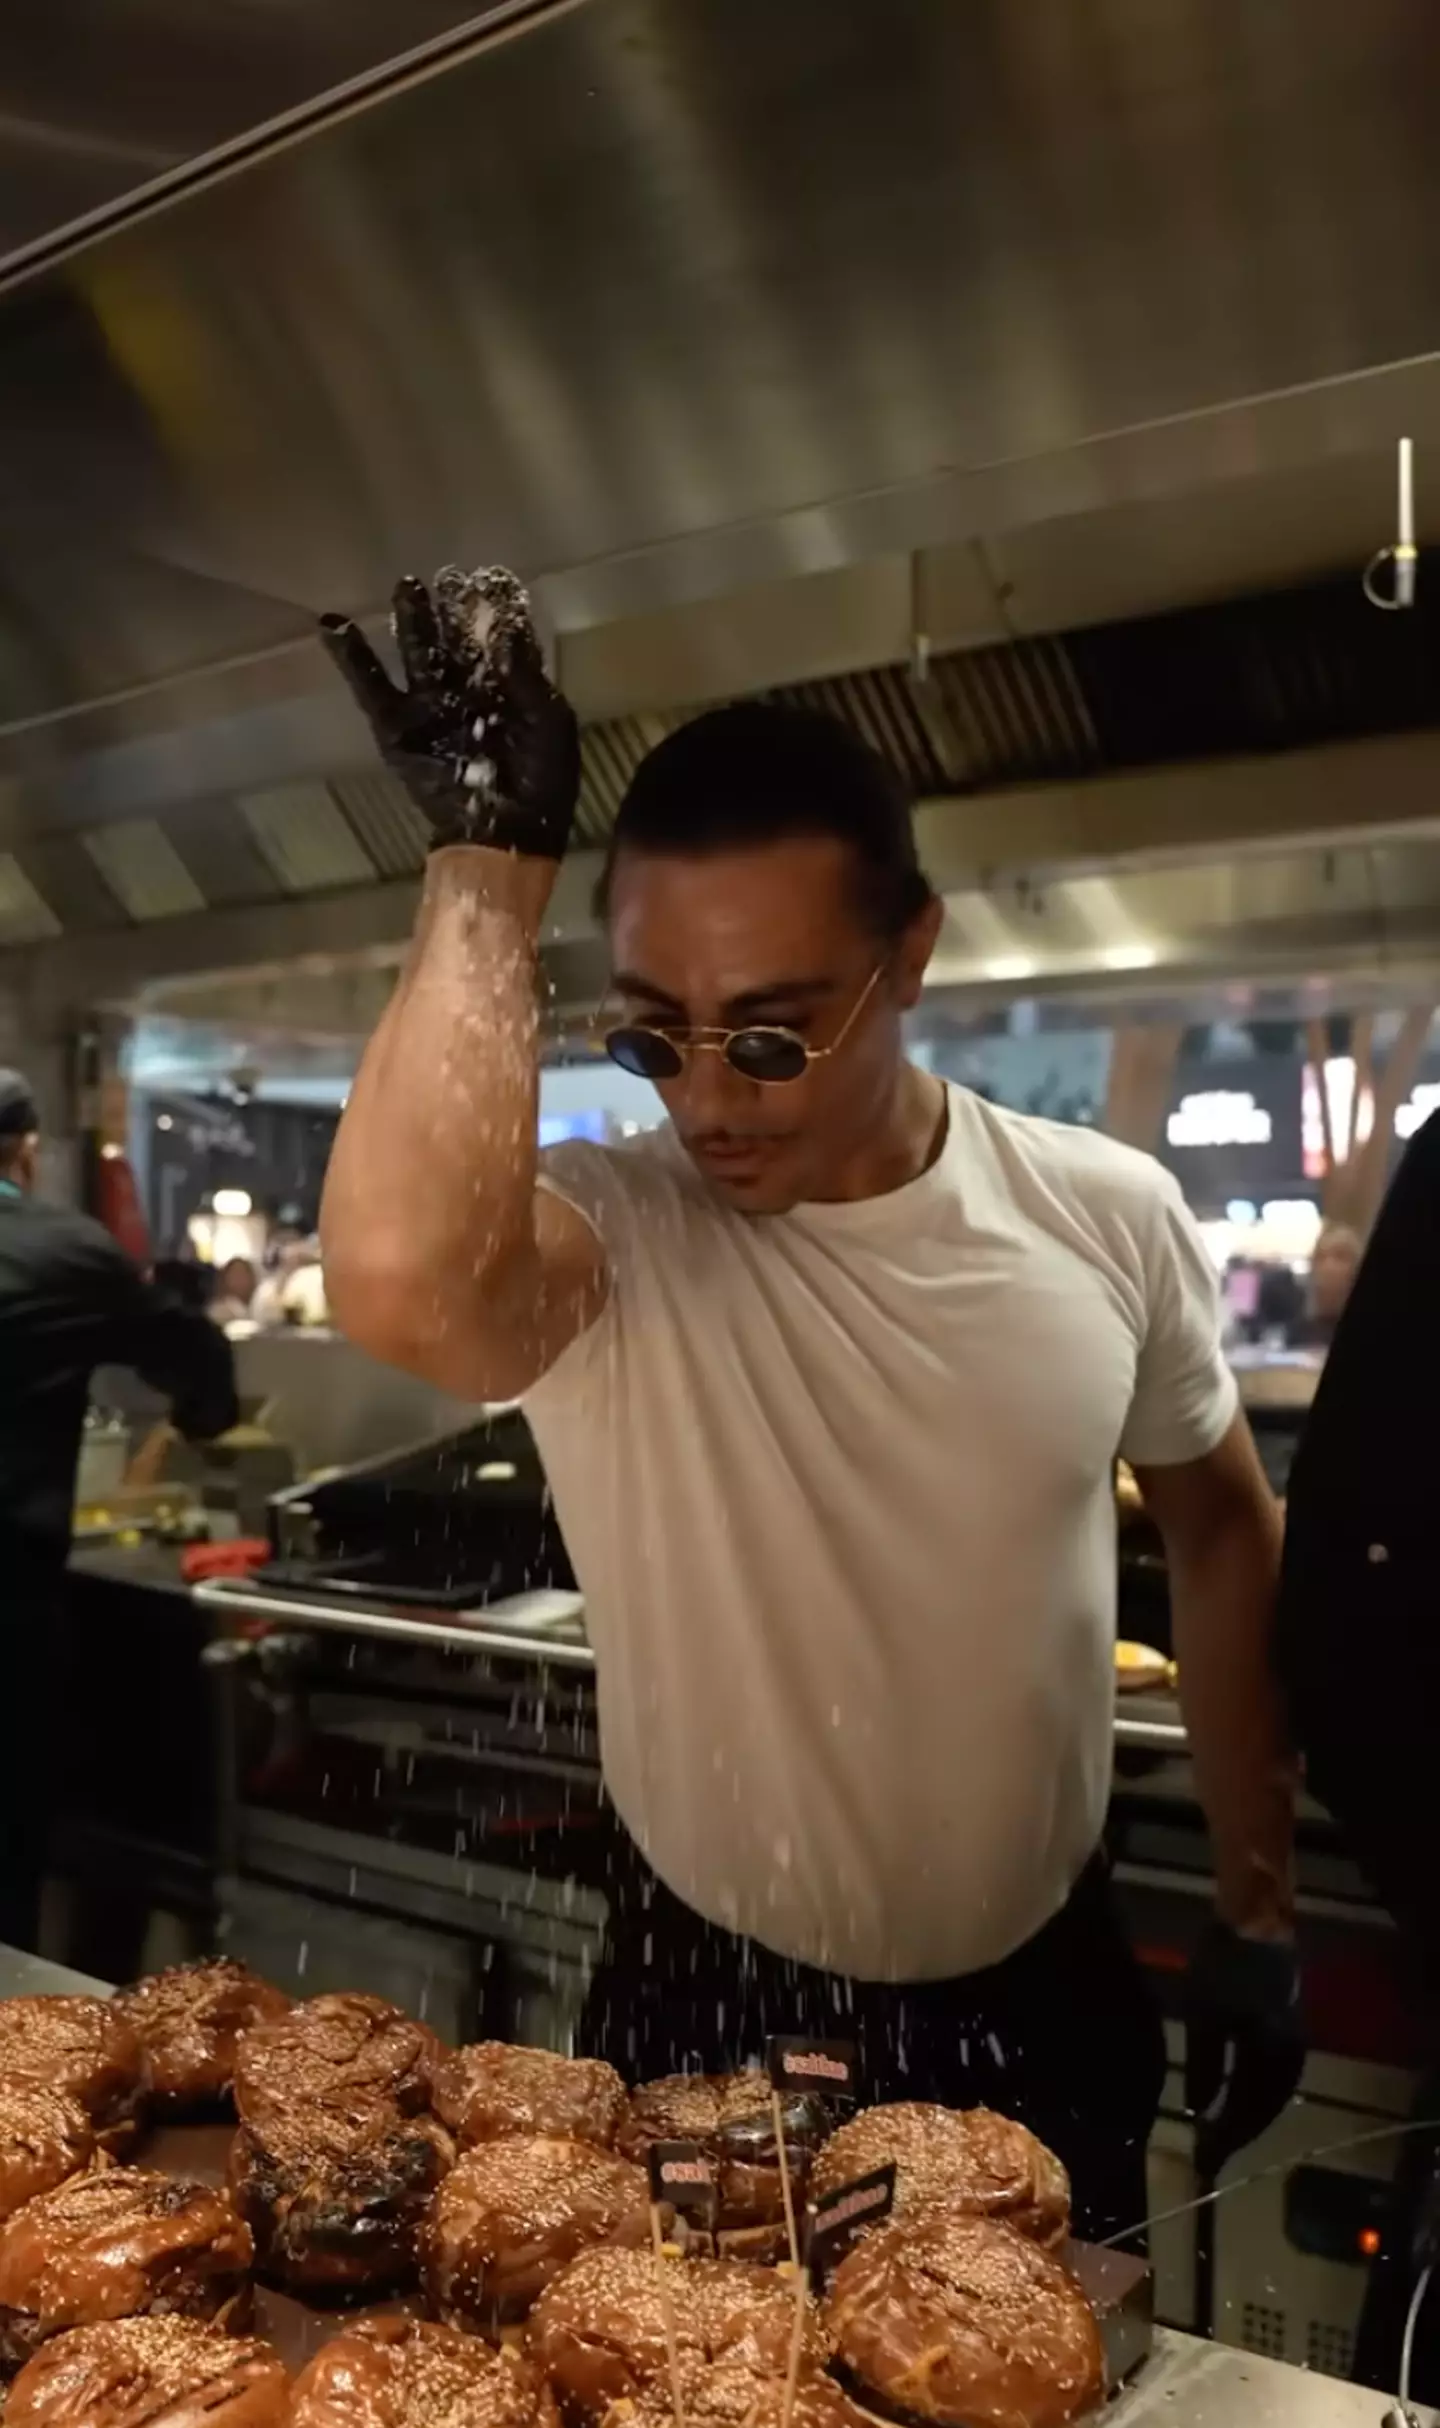 Salt Bae's fame came after he was made into an online meme.